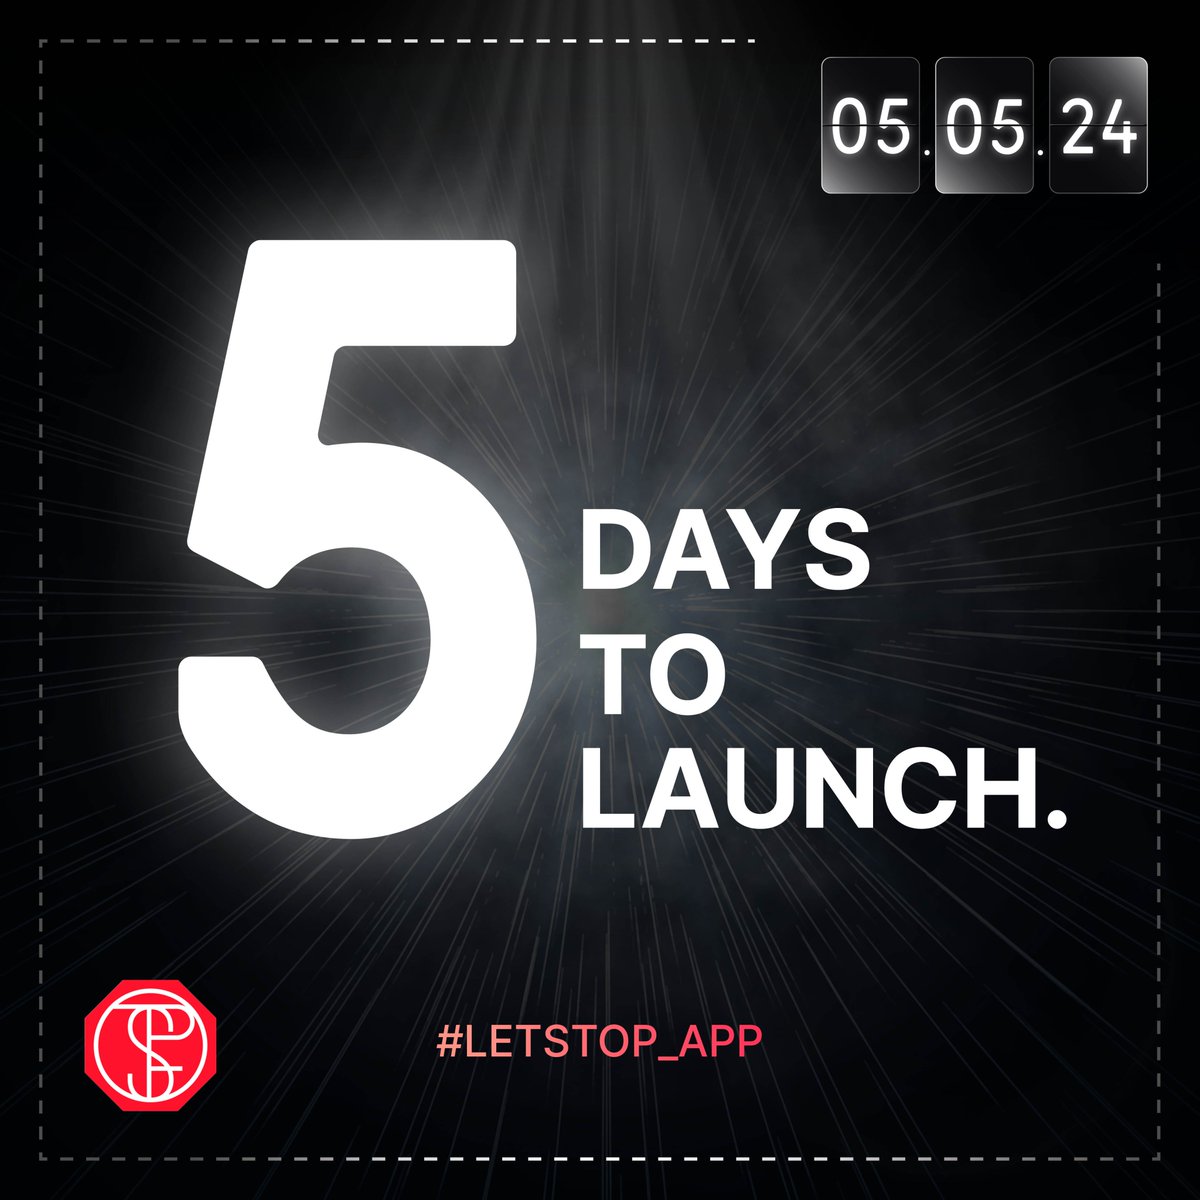 🚀5 Days Until Launch! 

🎁The first 1,000 early birds get a FREE Welcome Box! 

🛑Download LETSTOP when we launch to claim yours. 

letstop.io

#LETSTOP #countdown  #SafeDriving #FreeGift